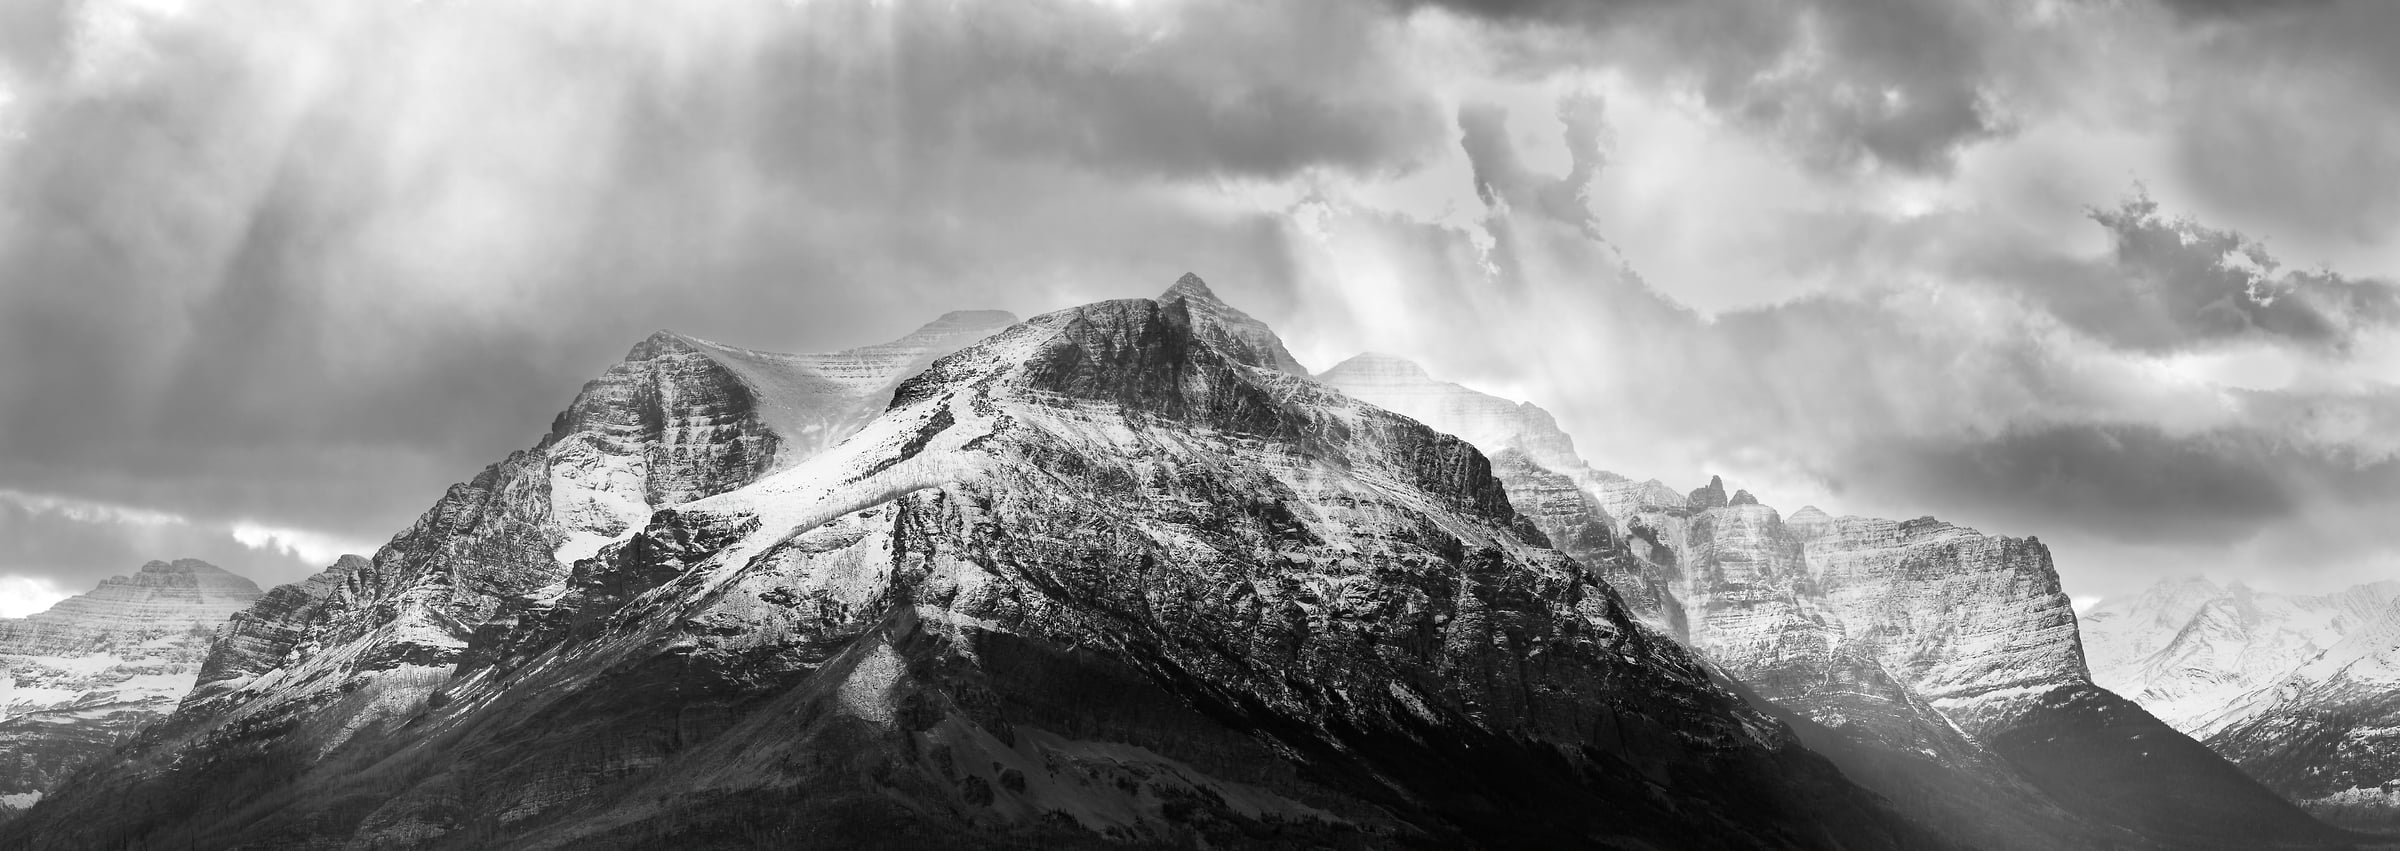 276 megapixels! A very high resolution, large-format VAST photo print of a mountain range with sun rays streaming onto it; black & white landscape photograph created by David David in Glacier National Park, Montana